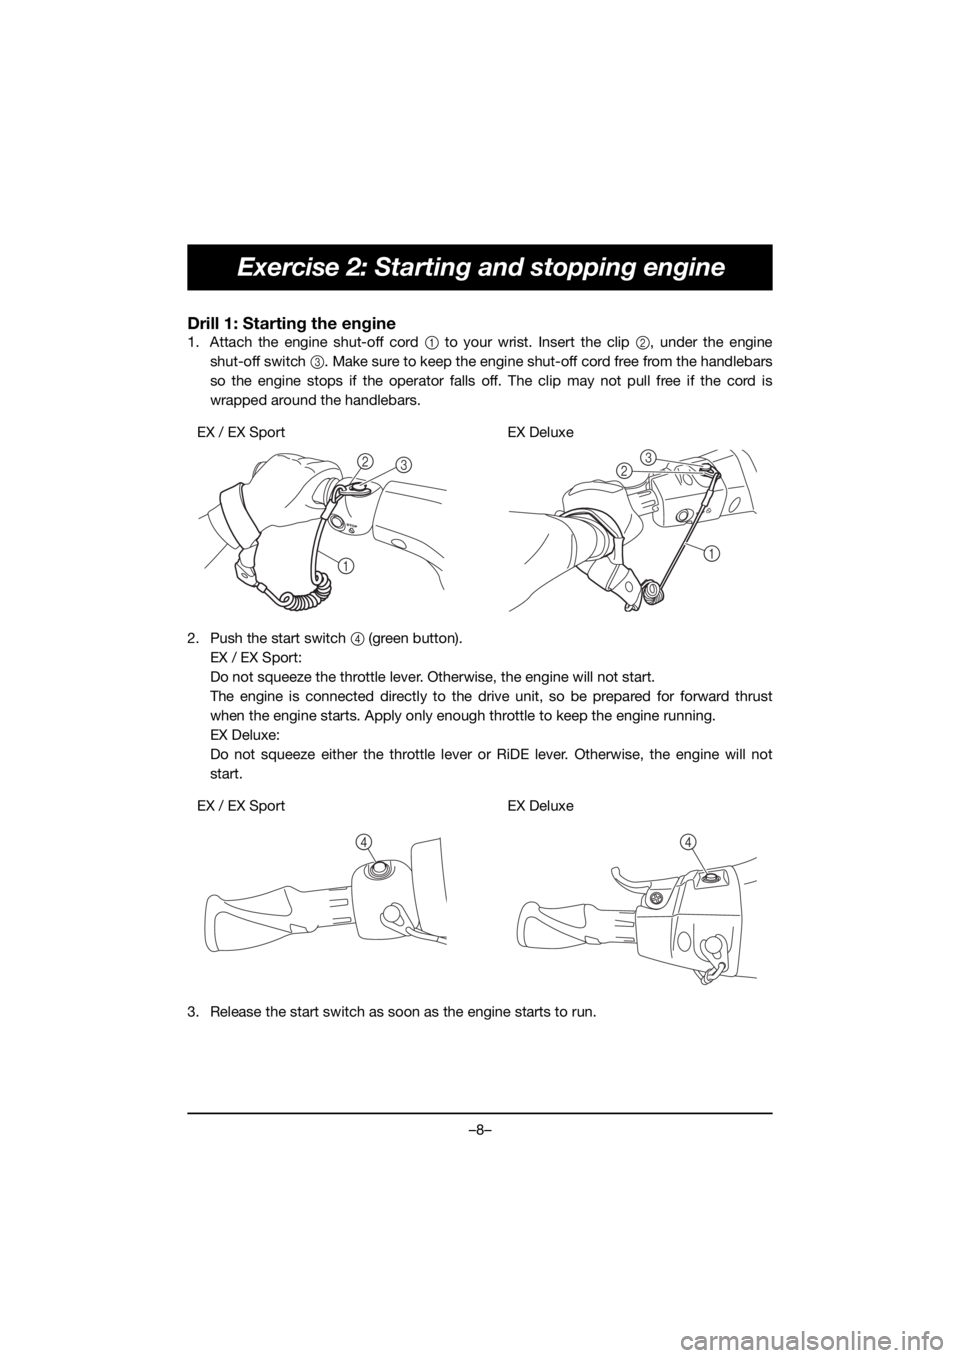 YAMAHA EX SPORT 2020 User Guide –8–
Exercise 2: Starting and stopping engine
Drill 1: Starting the engine
1. Attach the engine shut-off cord 1 to your wrist. Insert the clip 2, under the engine
shut-off switch 3. Make sure to ke